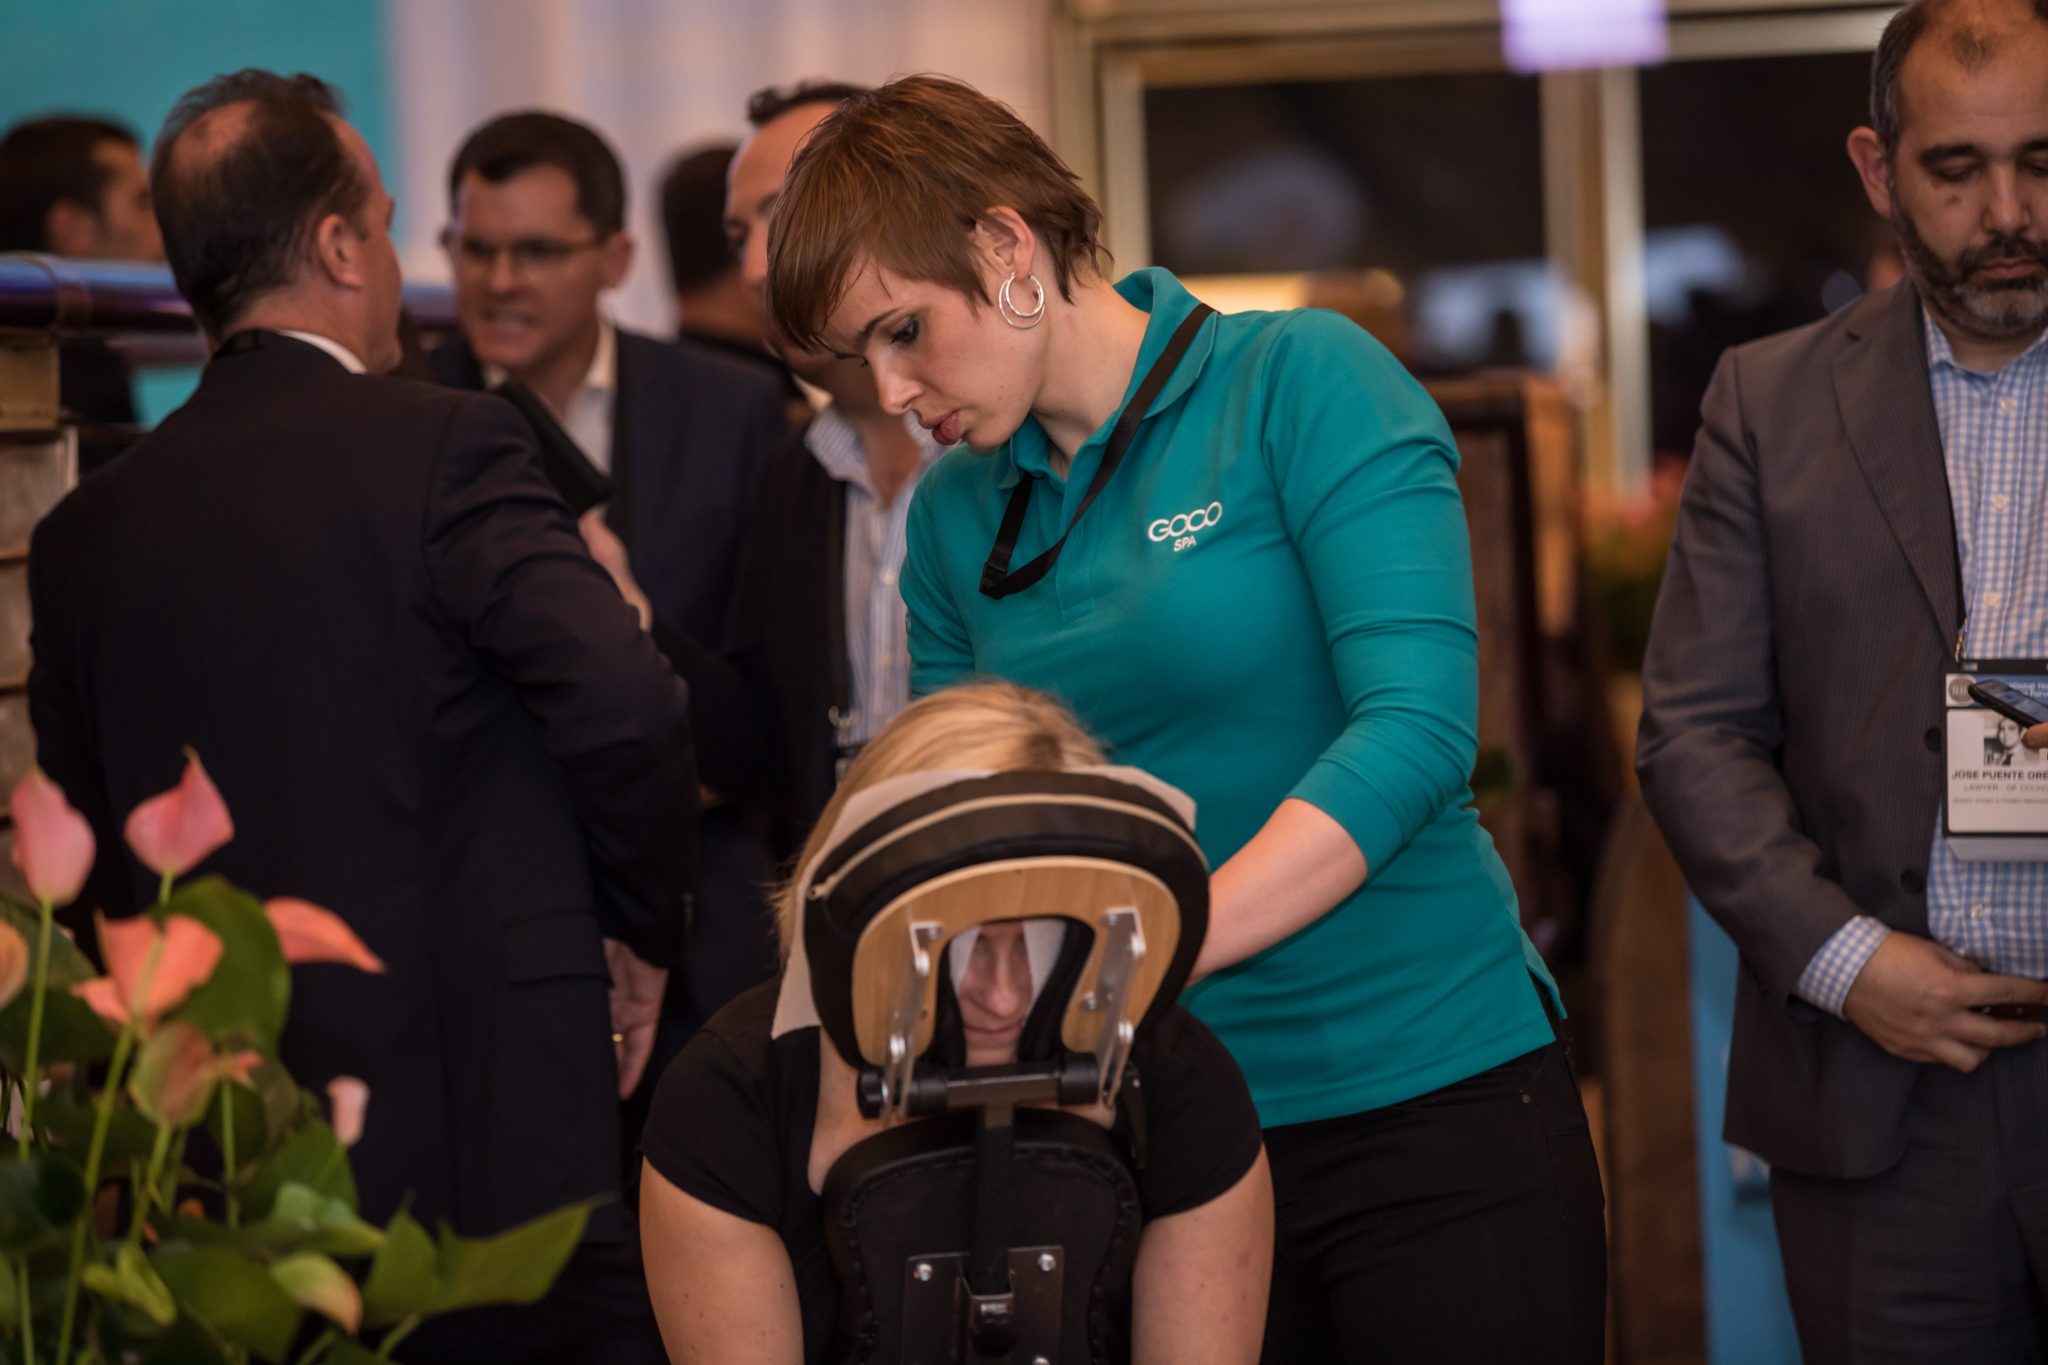 Head and shoulder massage at IHIF Conference 2019